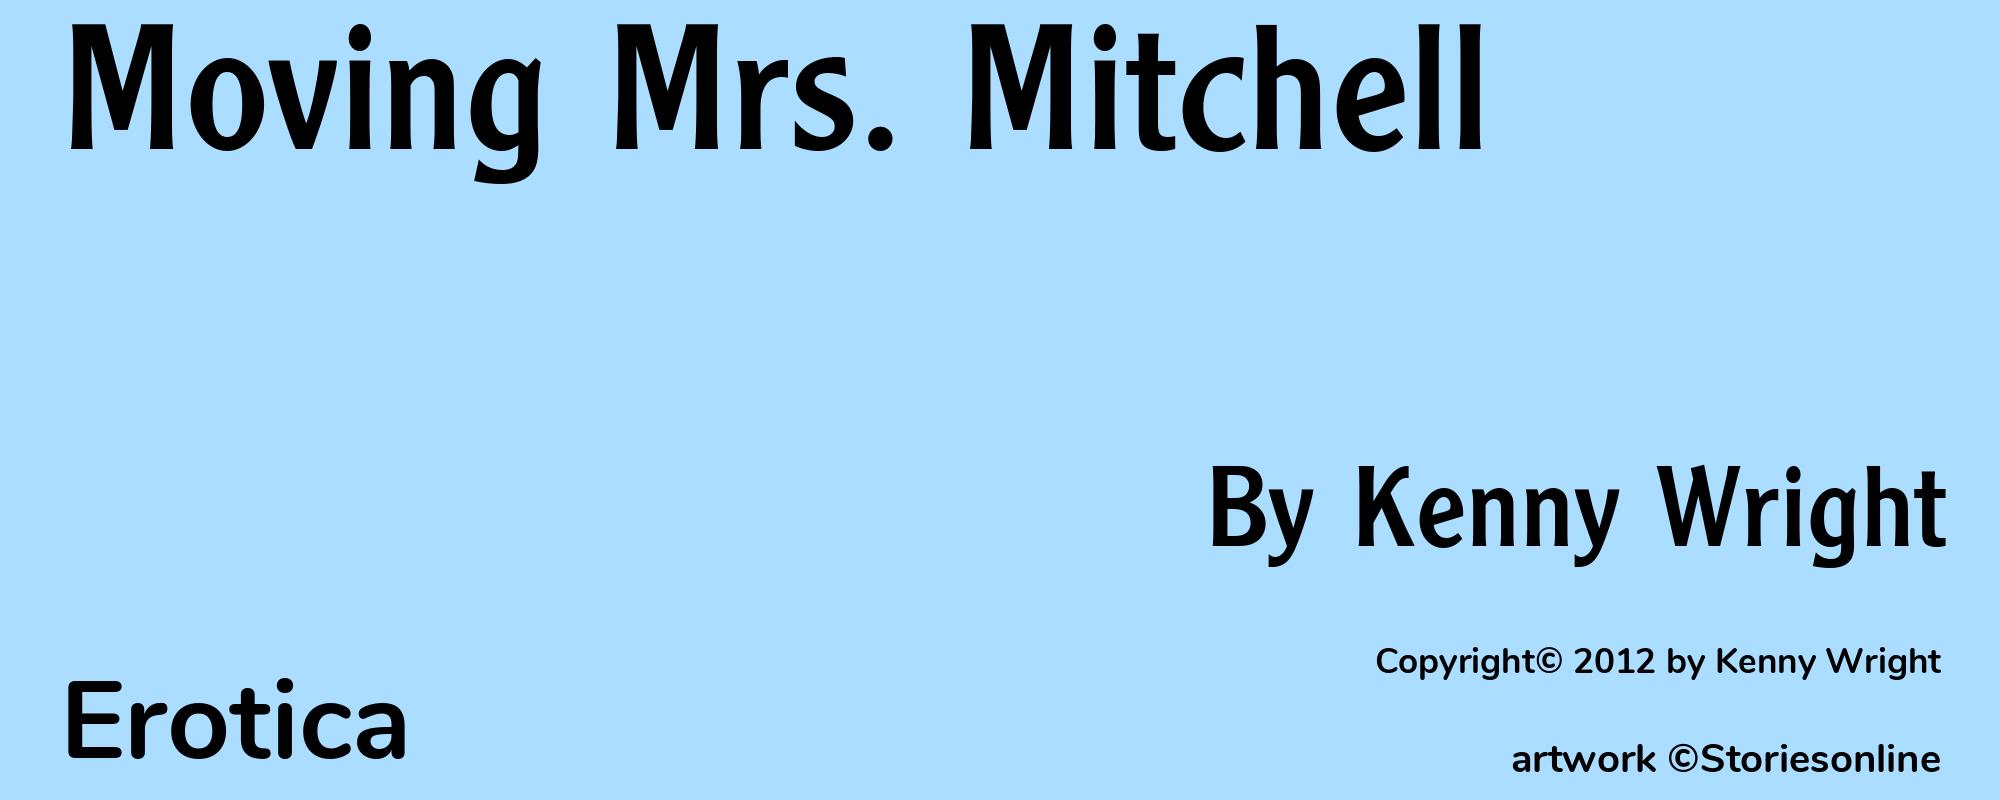 Moving Mrs. Mitchell - Cover